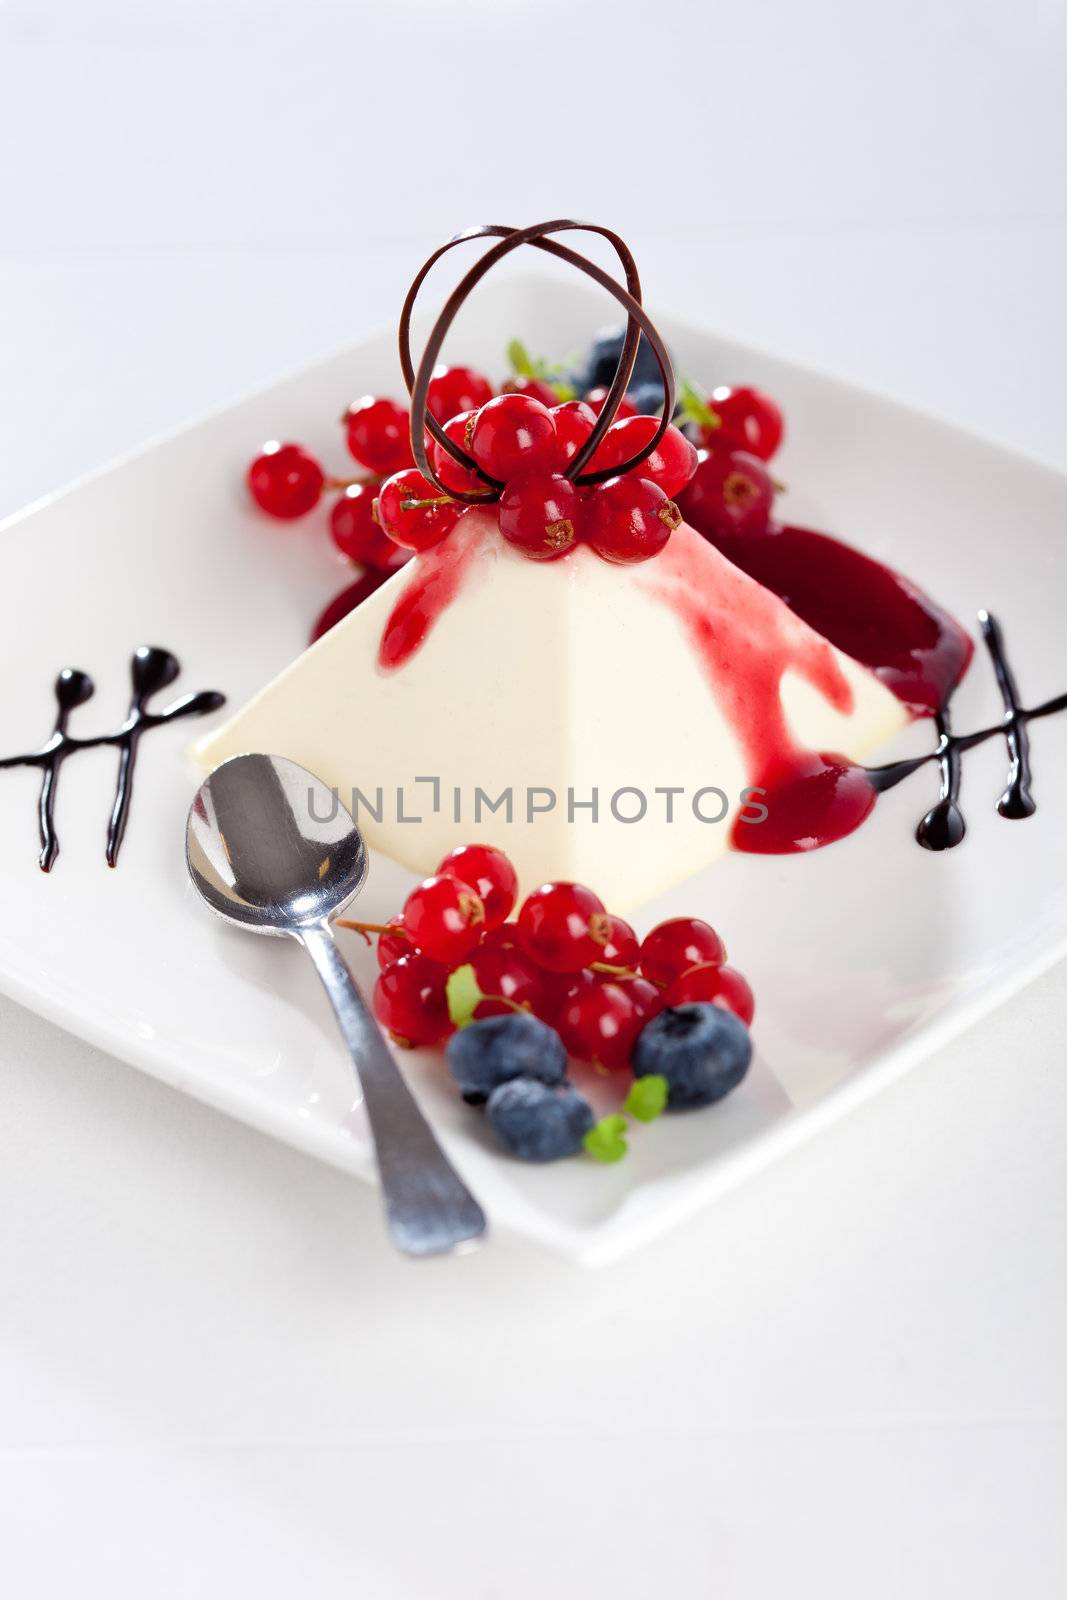 Delicious and fresh pannacotta with raspberry coulis and fresh fruits of the forest